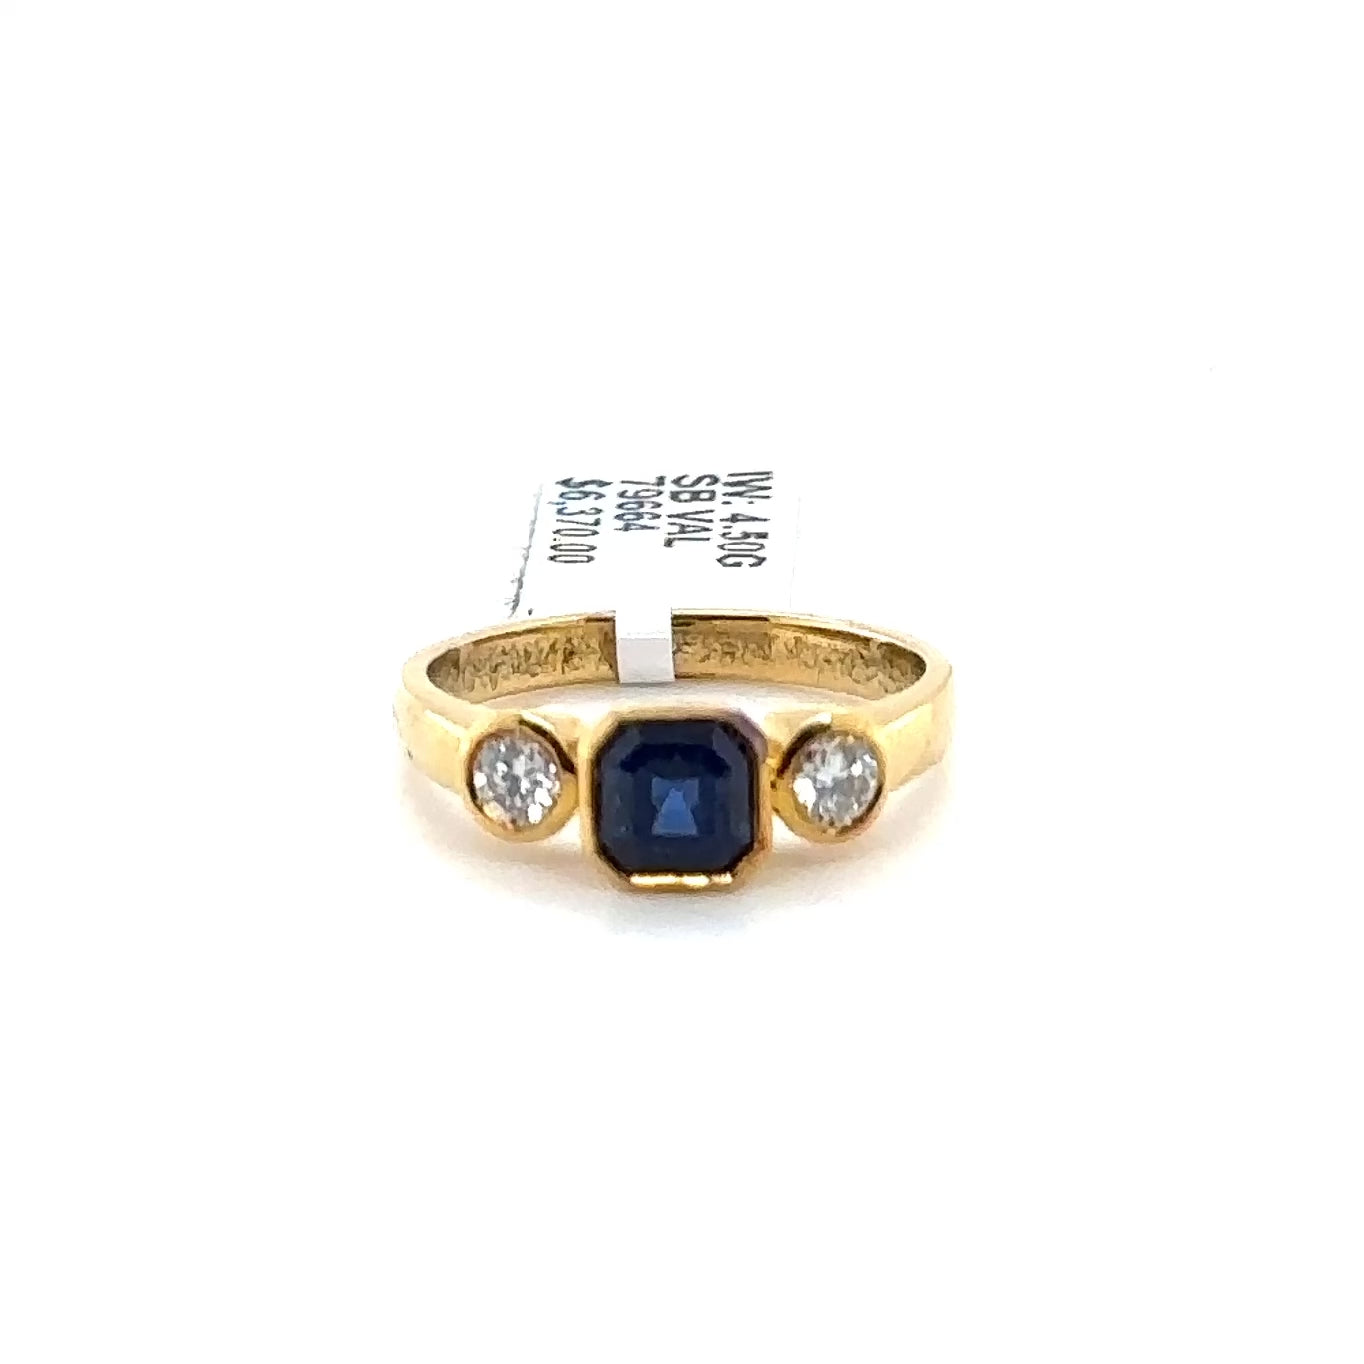 Trilogy Ceylon Sapphire and Diamond ring in 18ct yellow gold